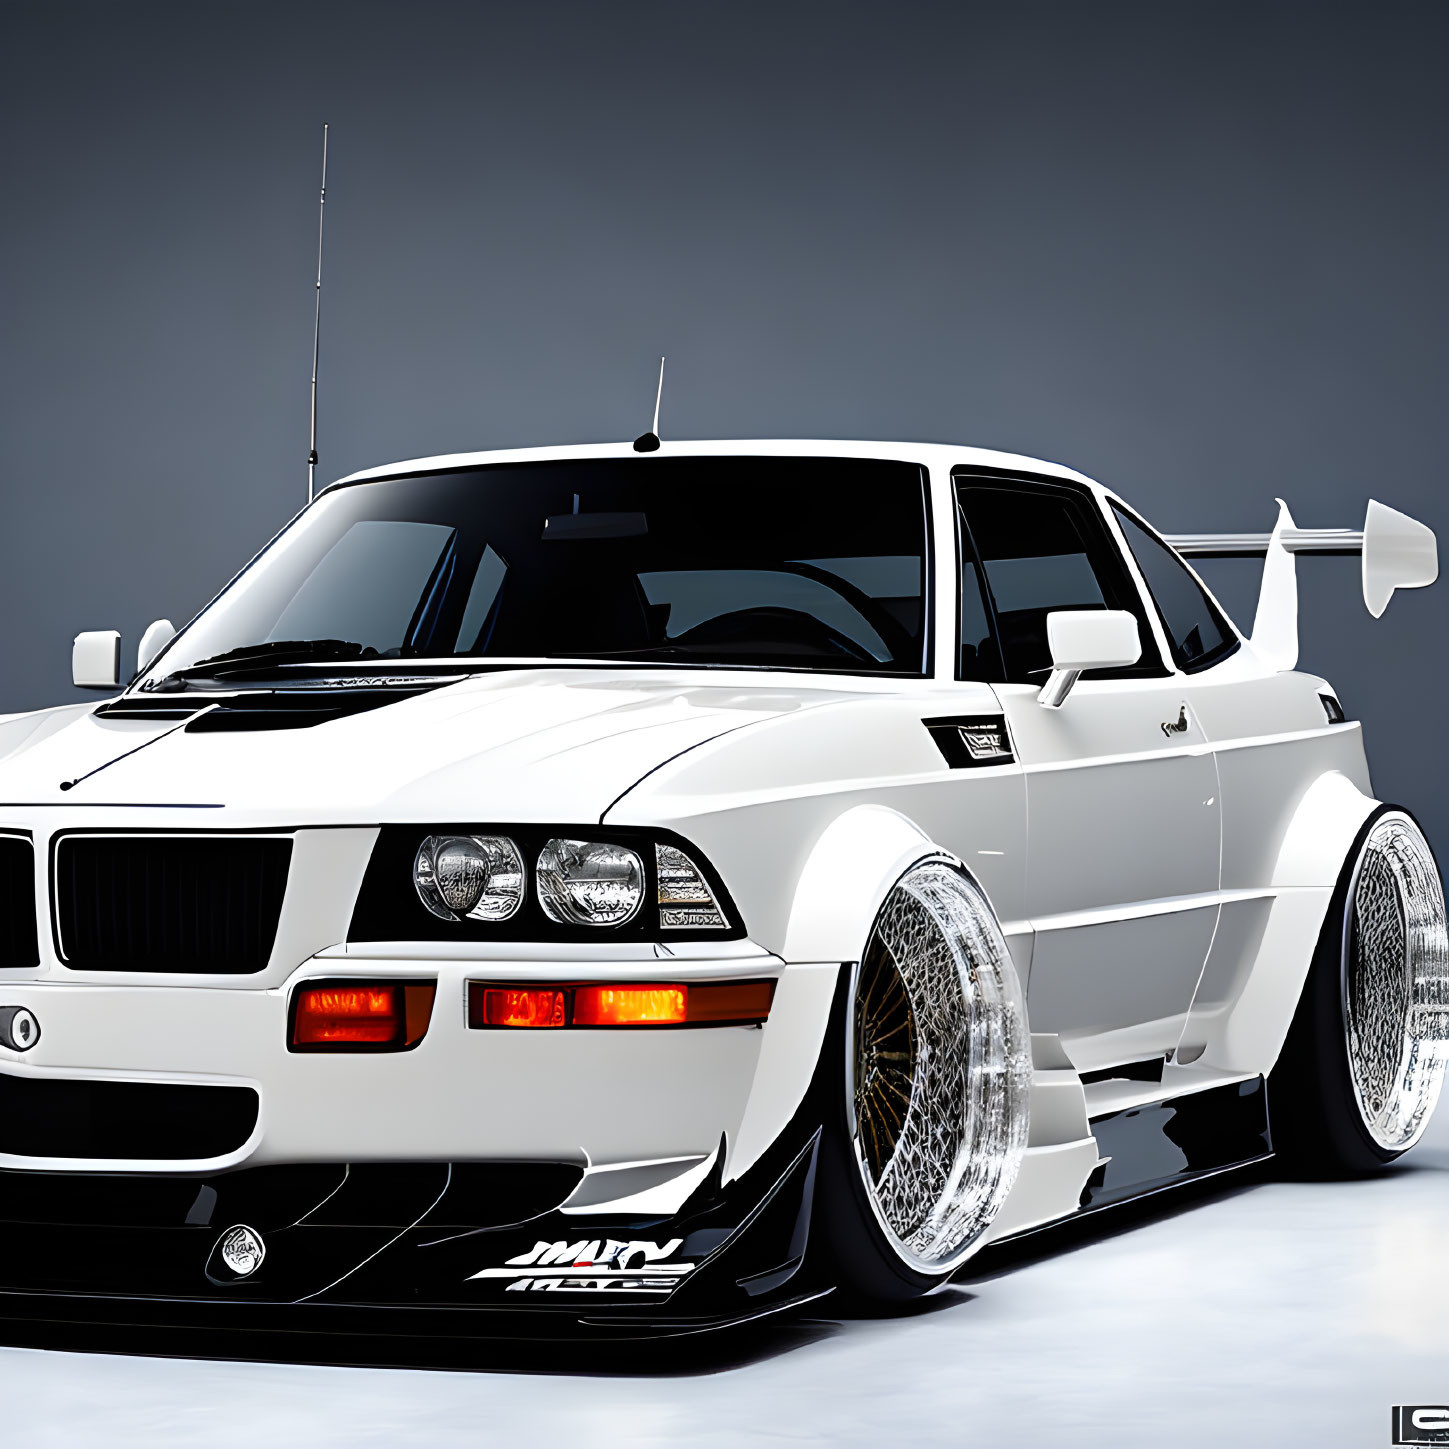 White Modified Sports Car with Wide Body Kit and Rear Wing on Grey Background